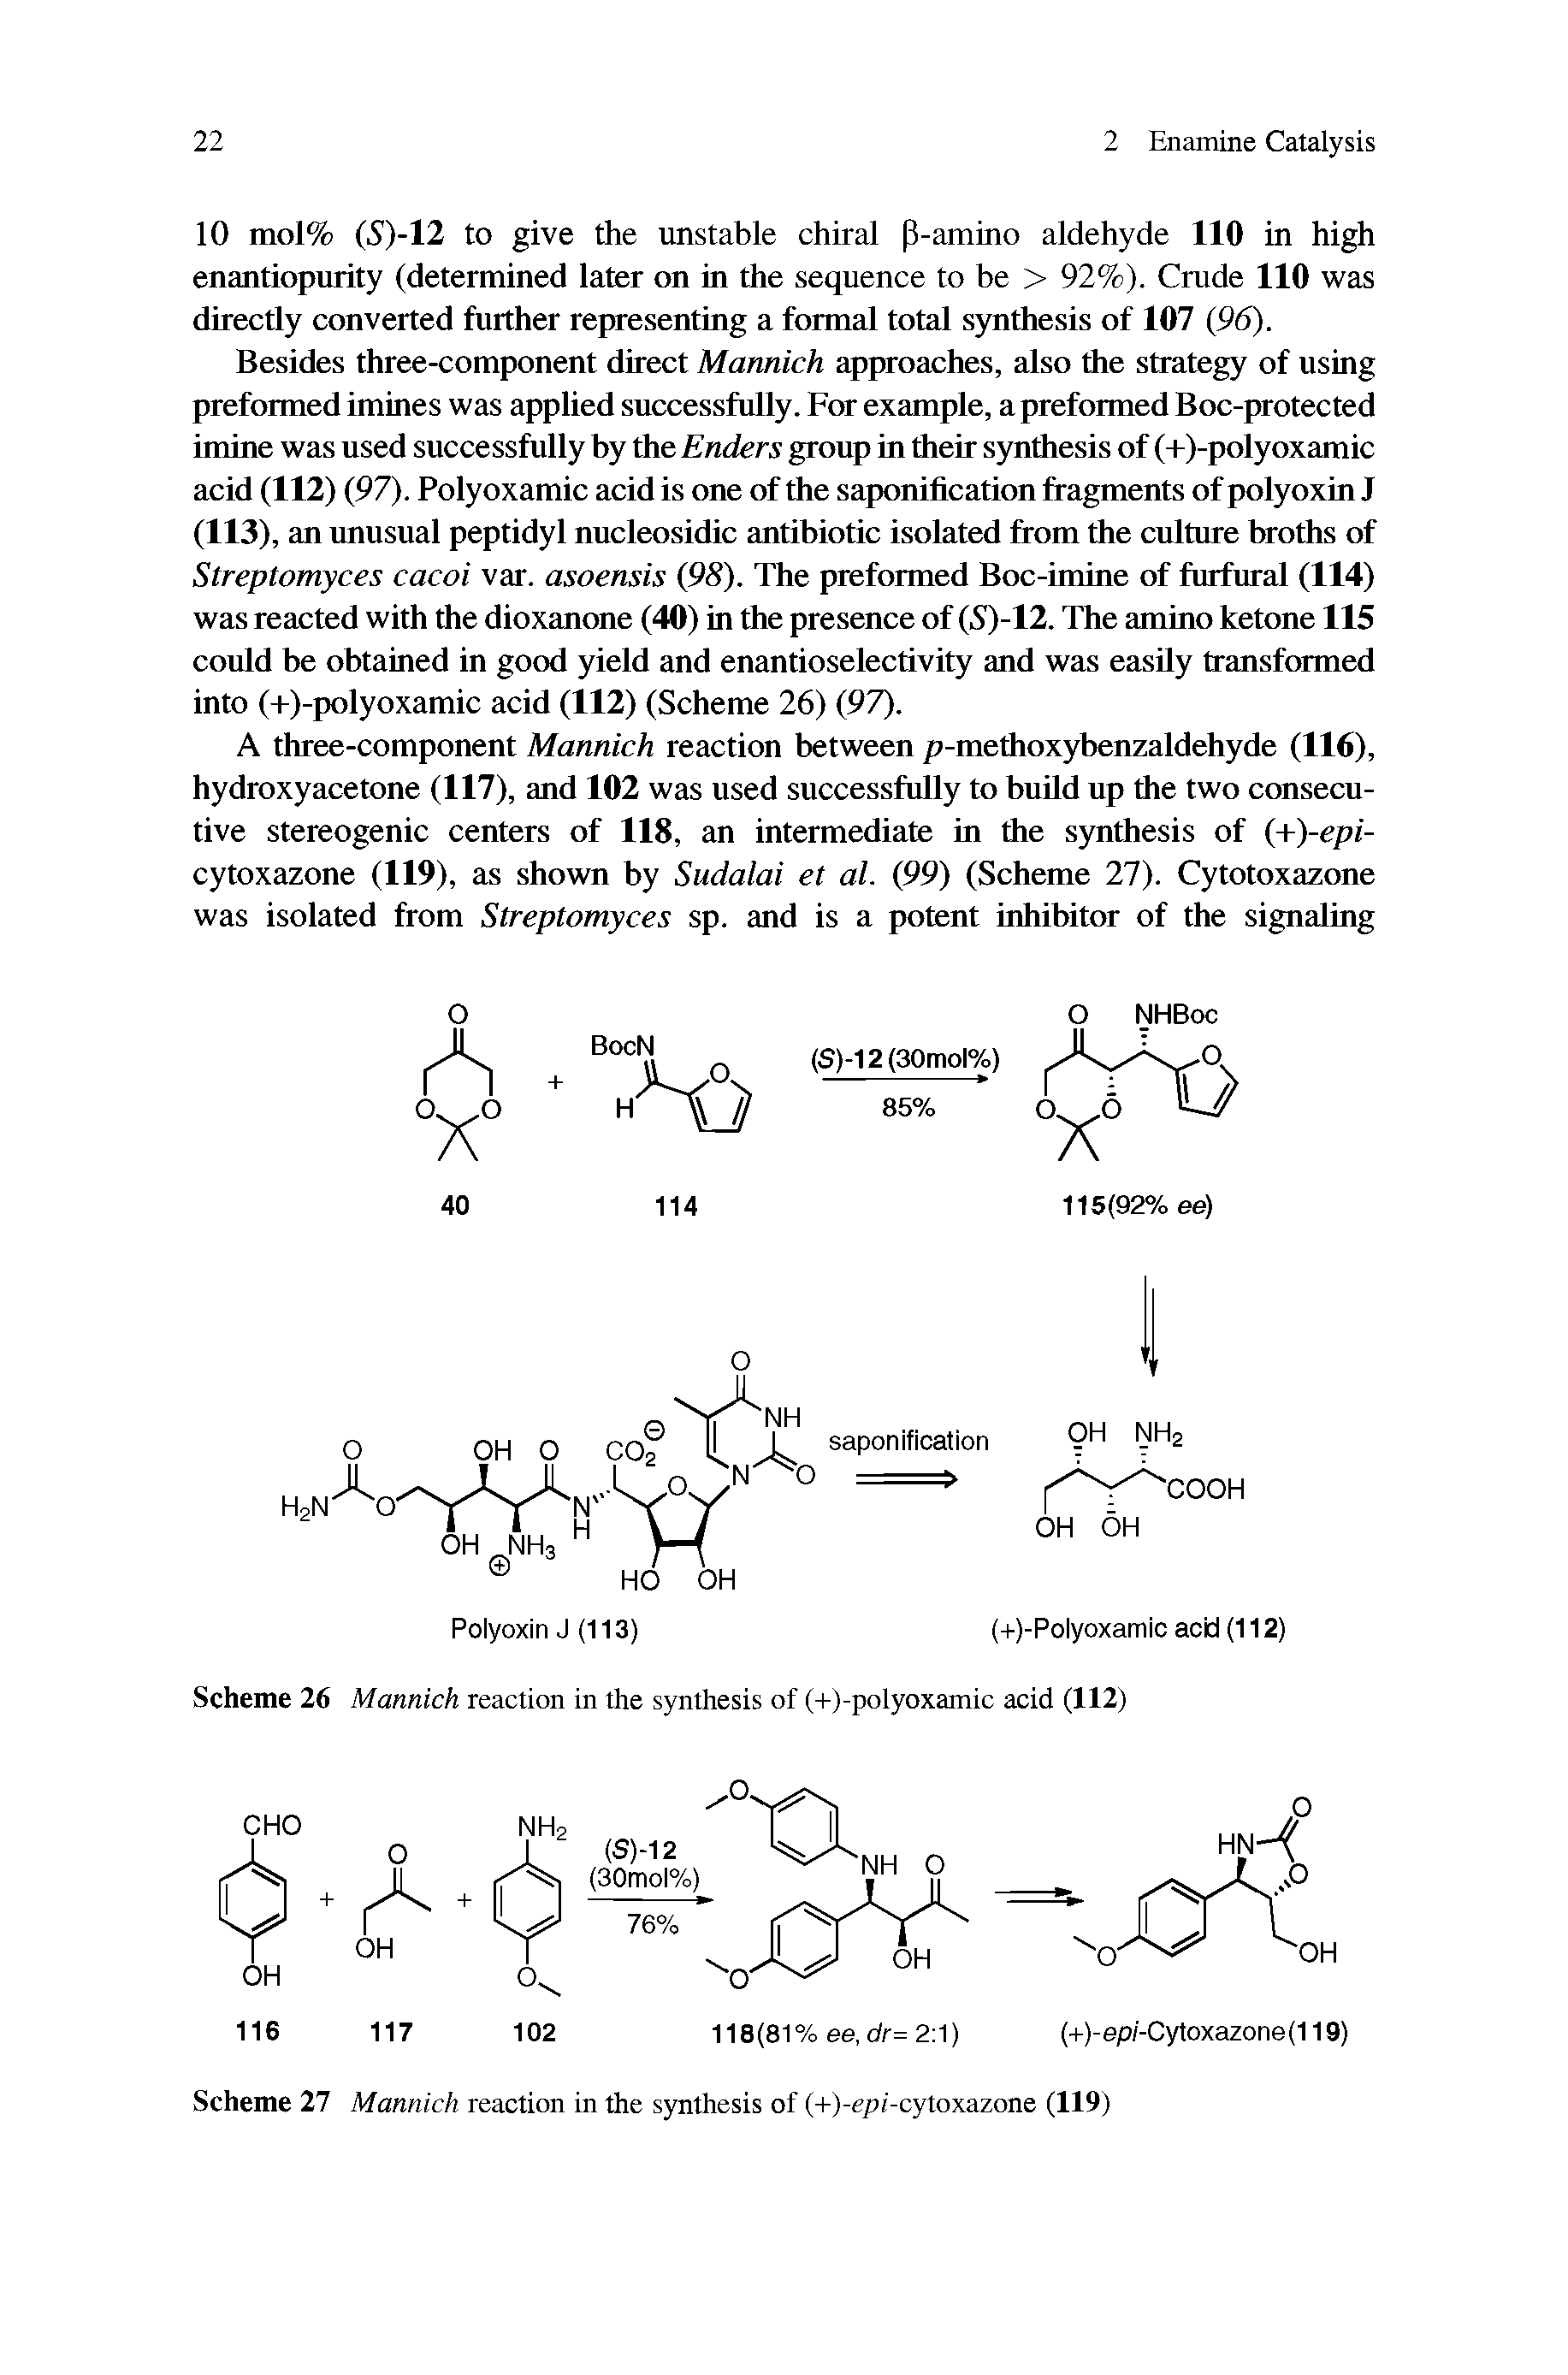 Scheme 26 Mannich reaction in the synthesis of (+)-polyoxamic acid (112)...